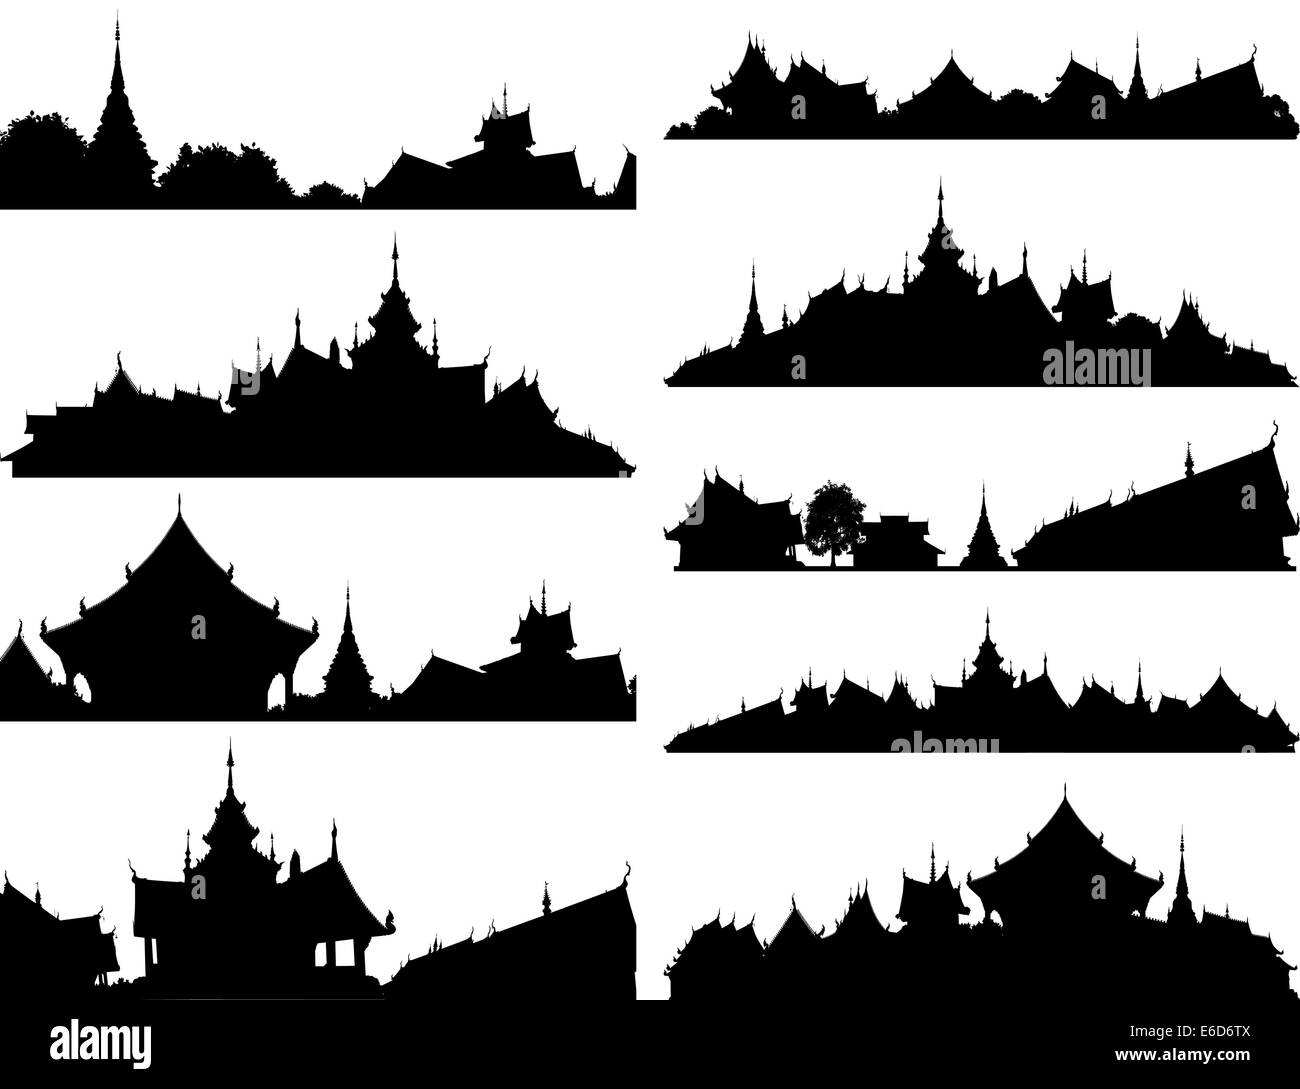 Set of editable vector silhouettes of Buddhist temple complexes Stock Vector